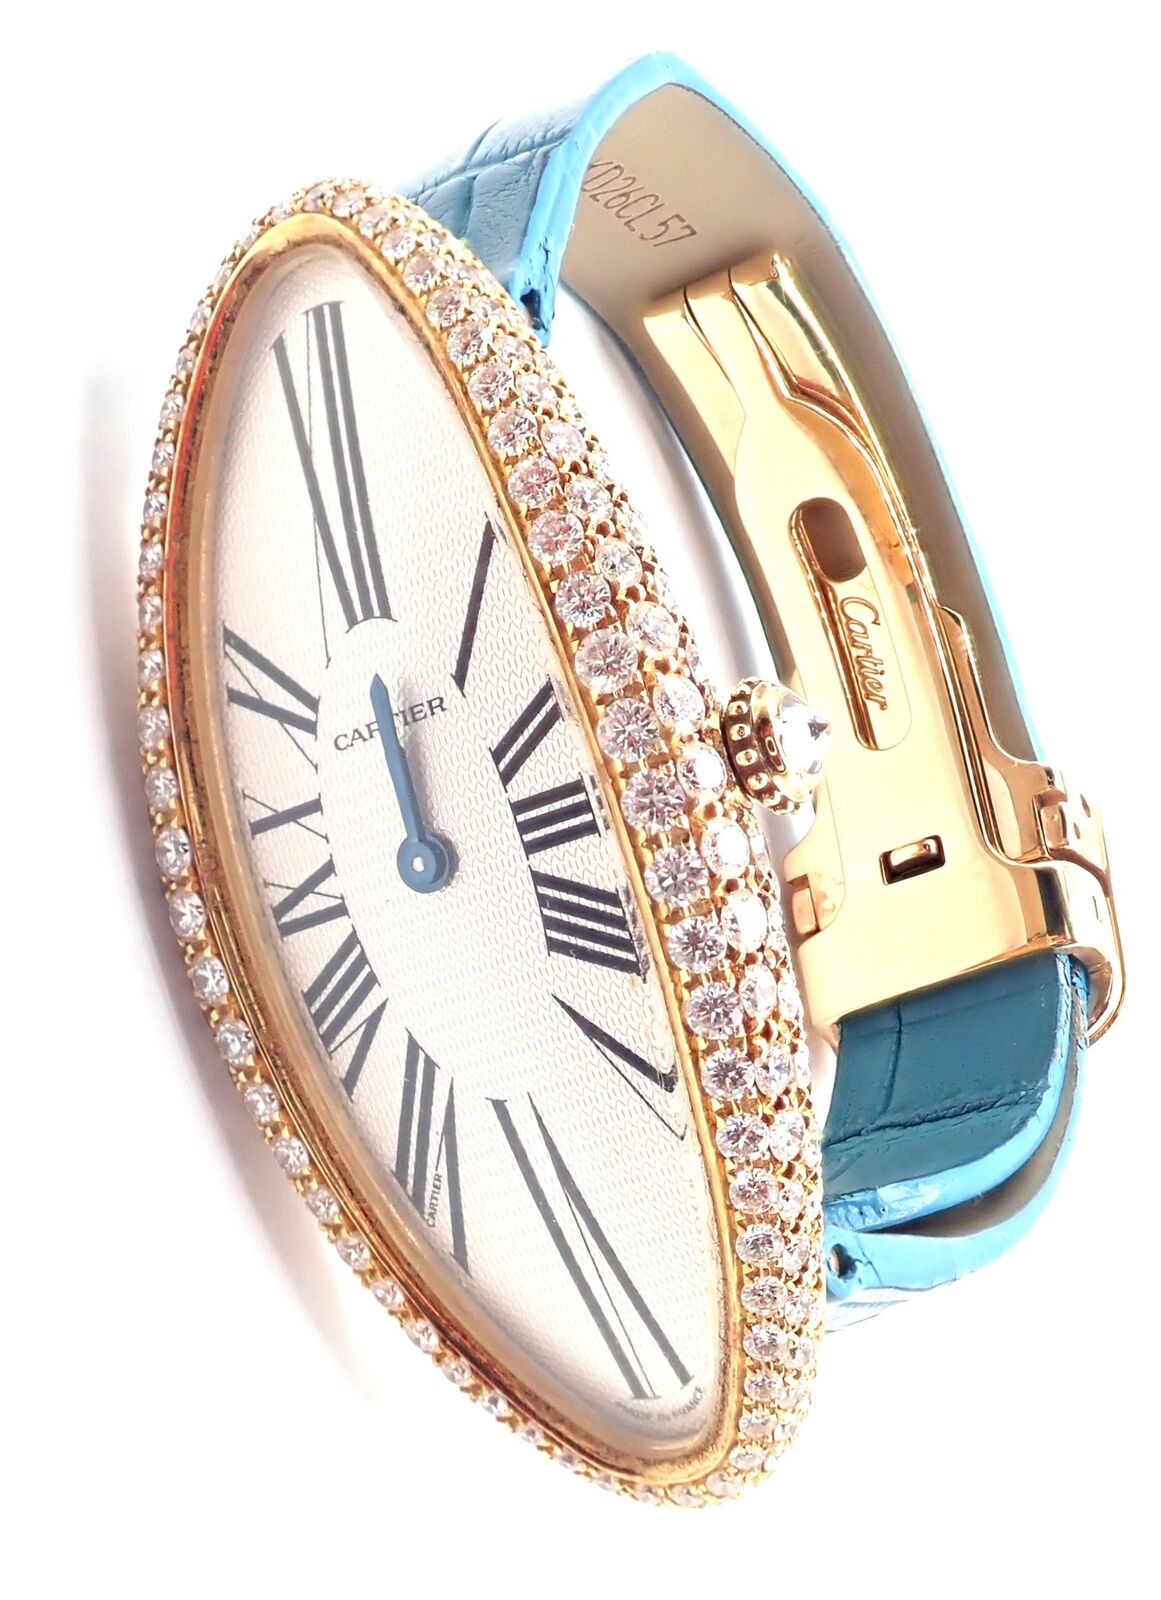 Cartier Jewelry & Watches:Watches, Parts & Accessories:Watches:Wristwatches Authentic! Cartier Baignoire Allongée 18k Gold Diamond Mechanical Watch 2672